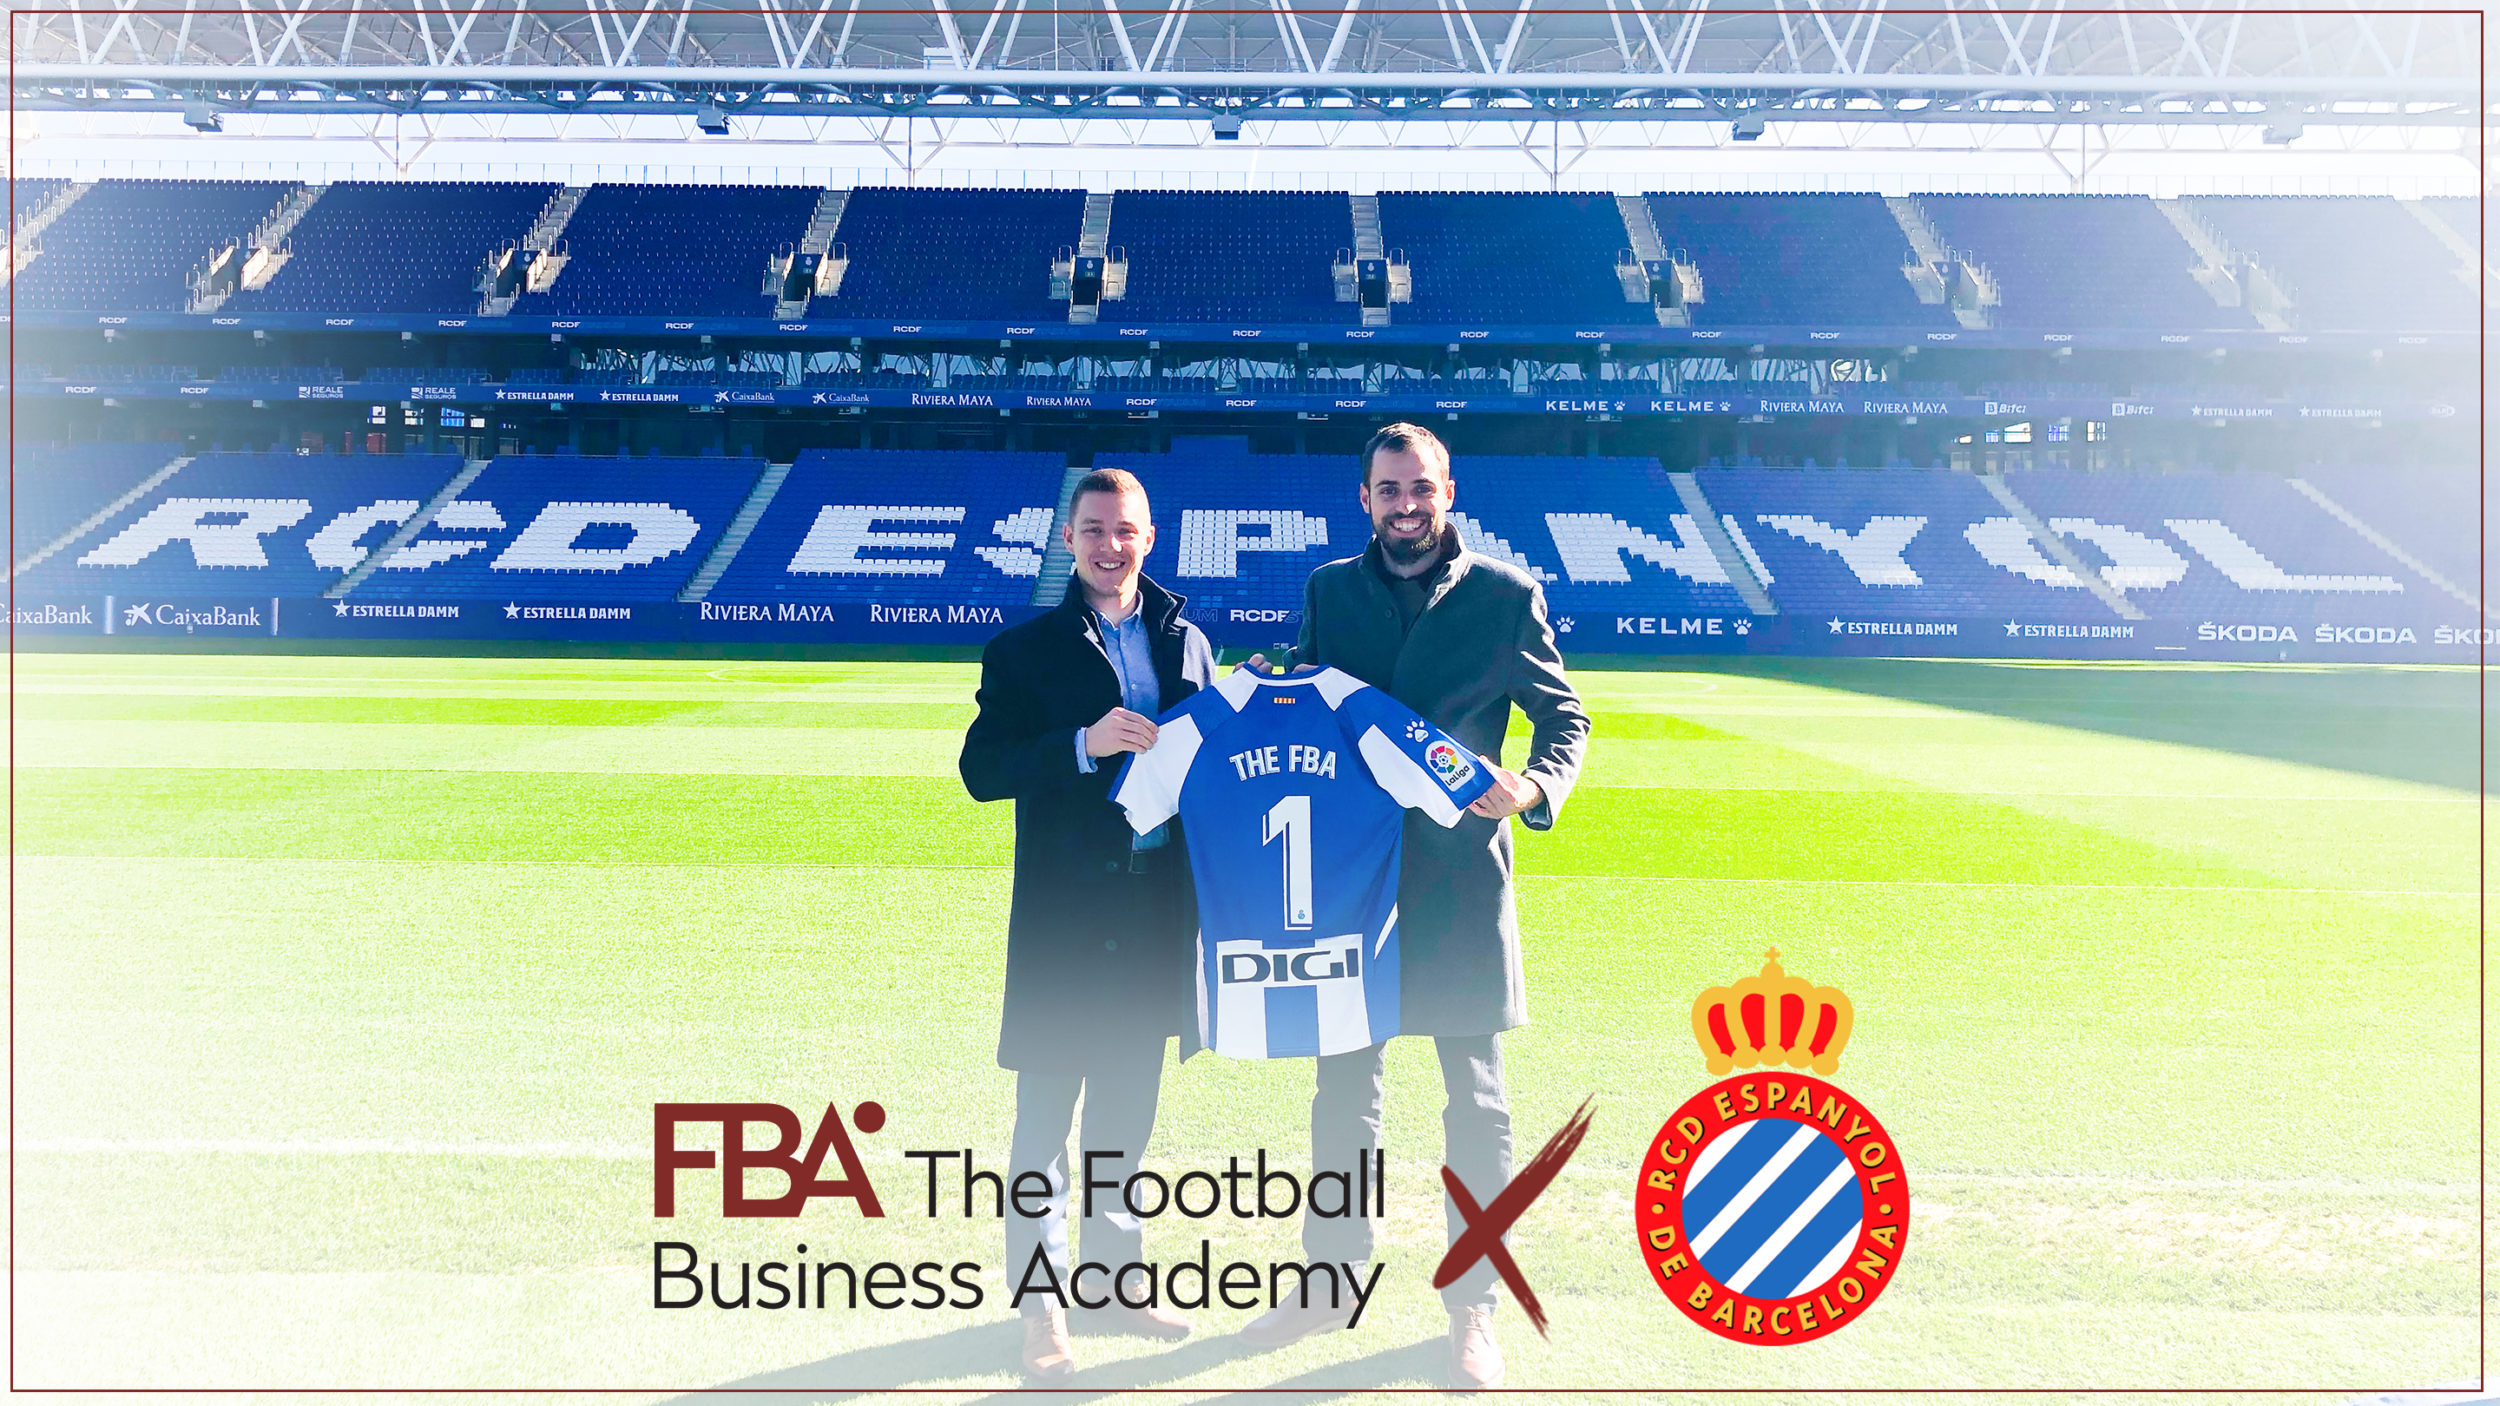 RCD Espanyol: Becoming rich from relegation : GamblersPost